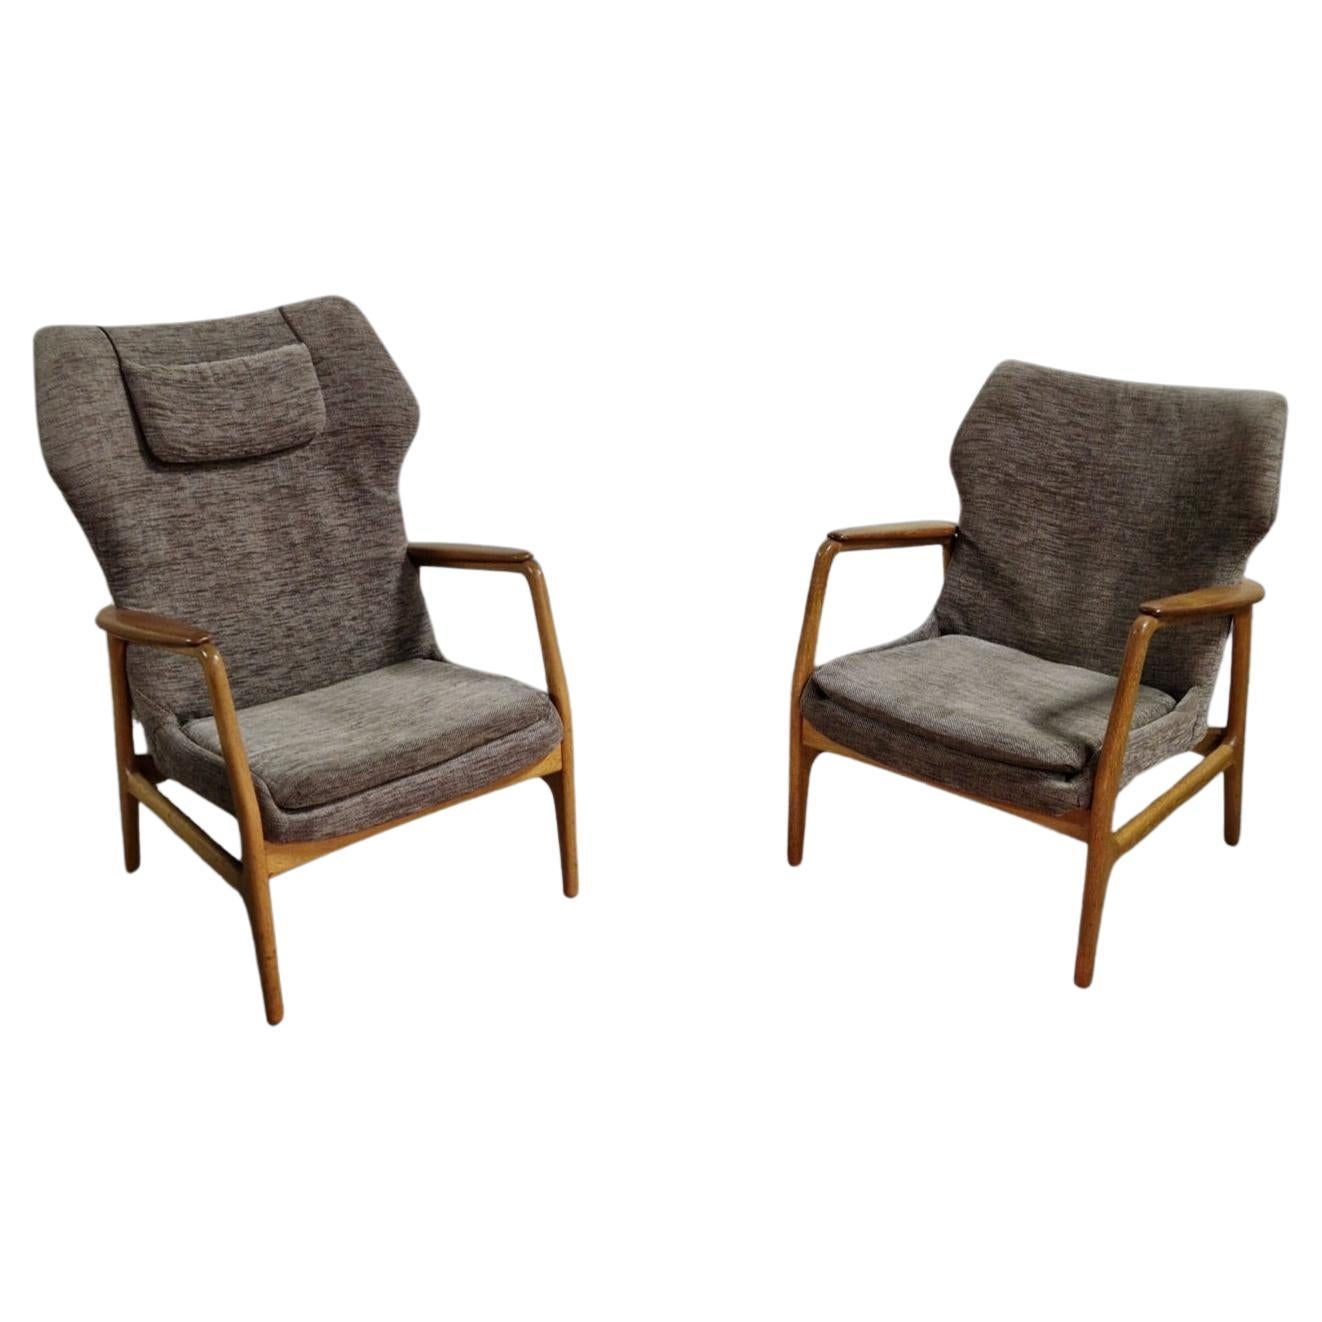 Set of 2 lounge chairs by Aksel Bender Madsen for Bovenkamp, Netherlands 1960s